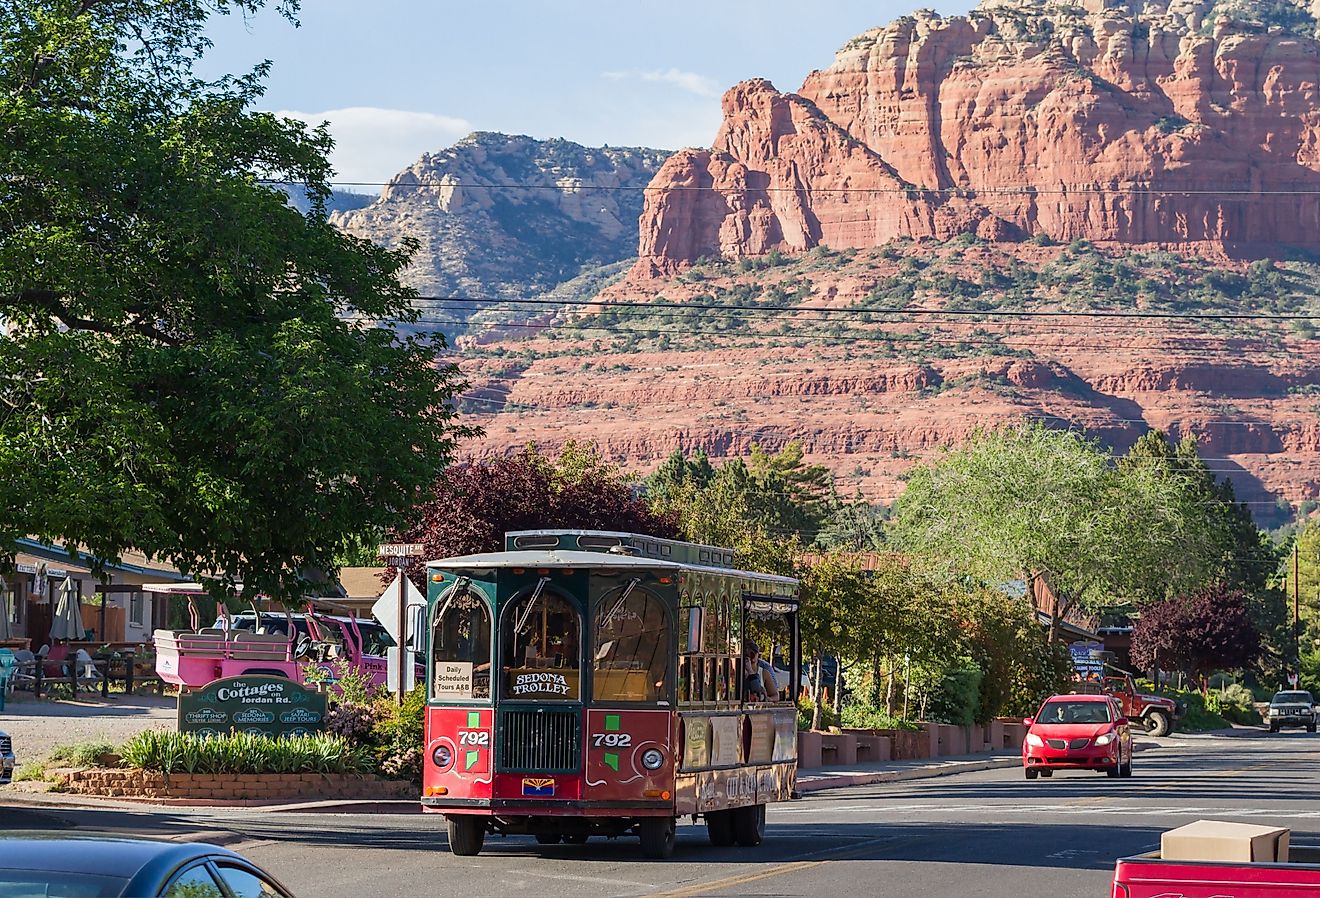 Sedona Trolley giving a tour of Sedona, Arizona and scenery, in spring. Image credit Wollertz via Shutterstock